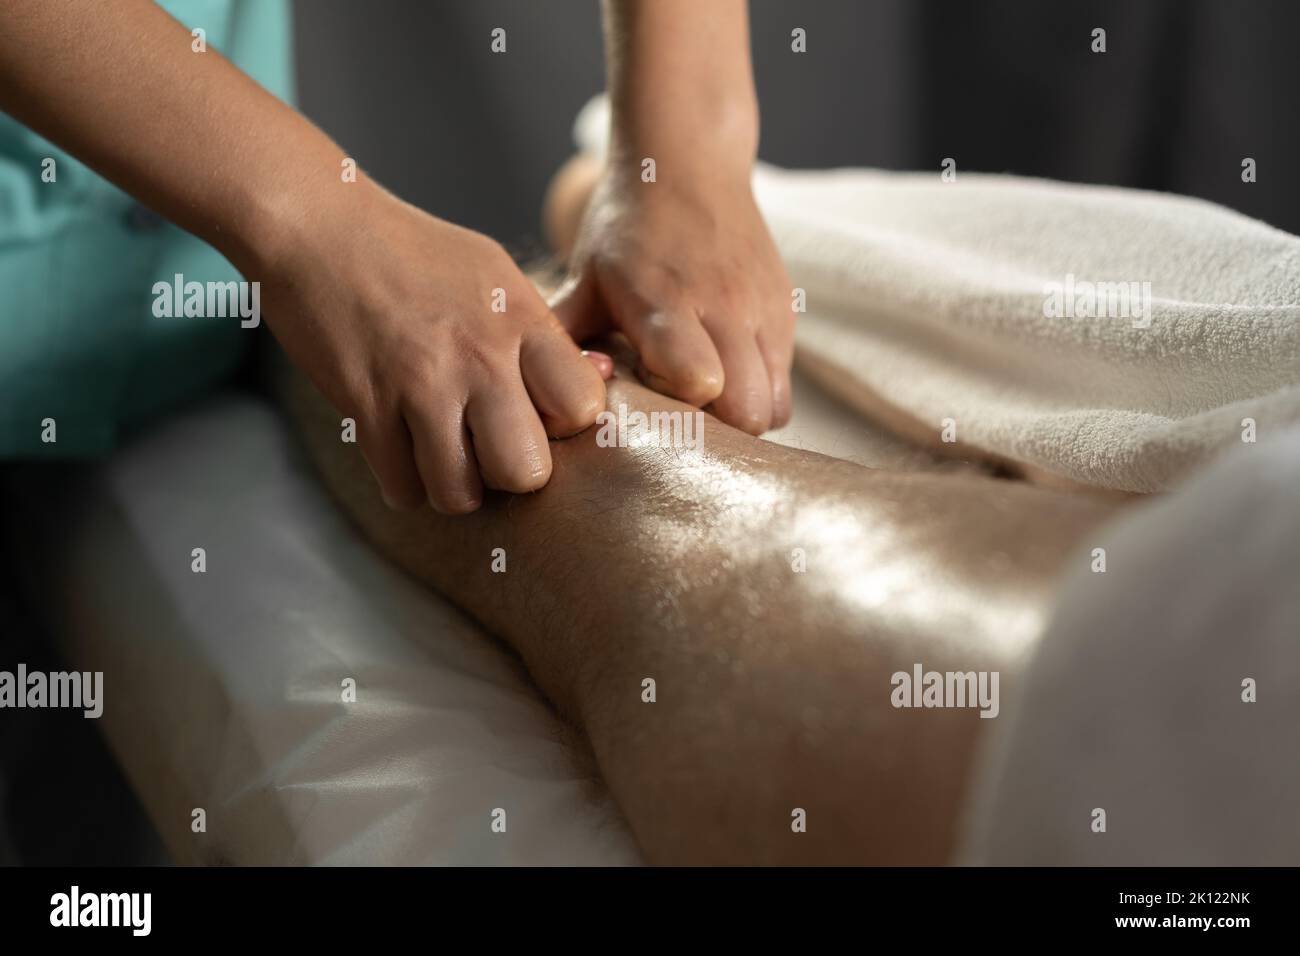 Sports massage. Female physiotherapist massaging the legs of a young male athlete. close-up masseur hands doing foot massage. Stock Photo